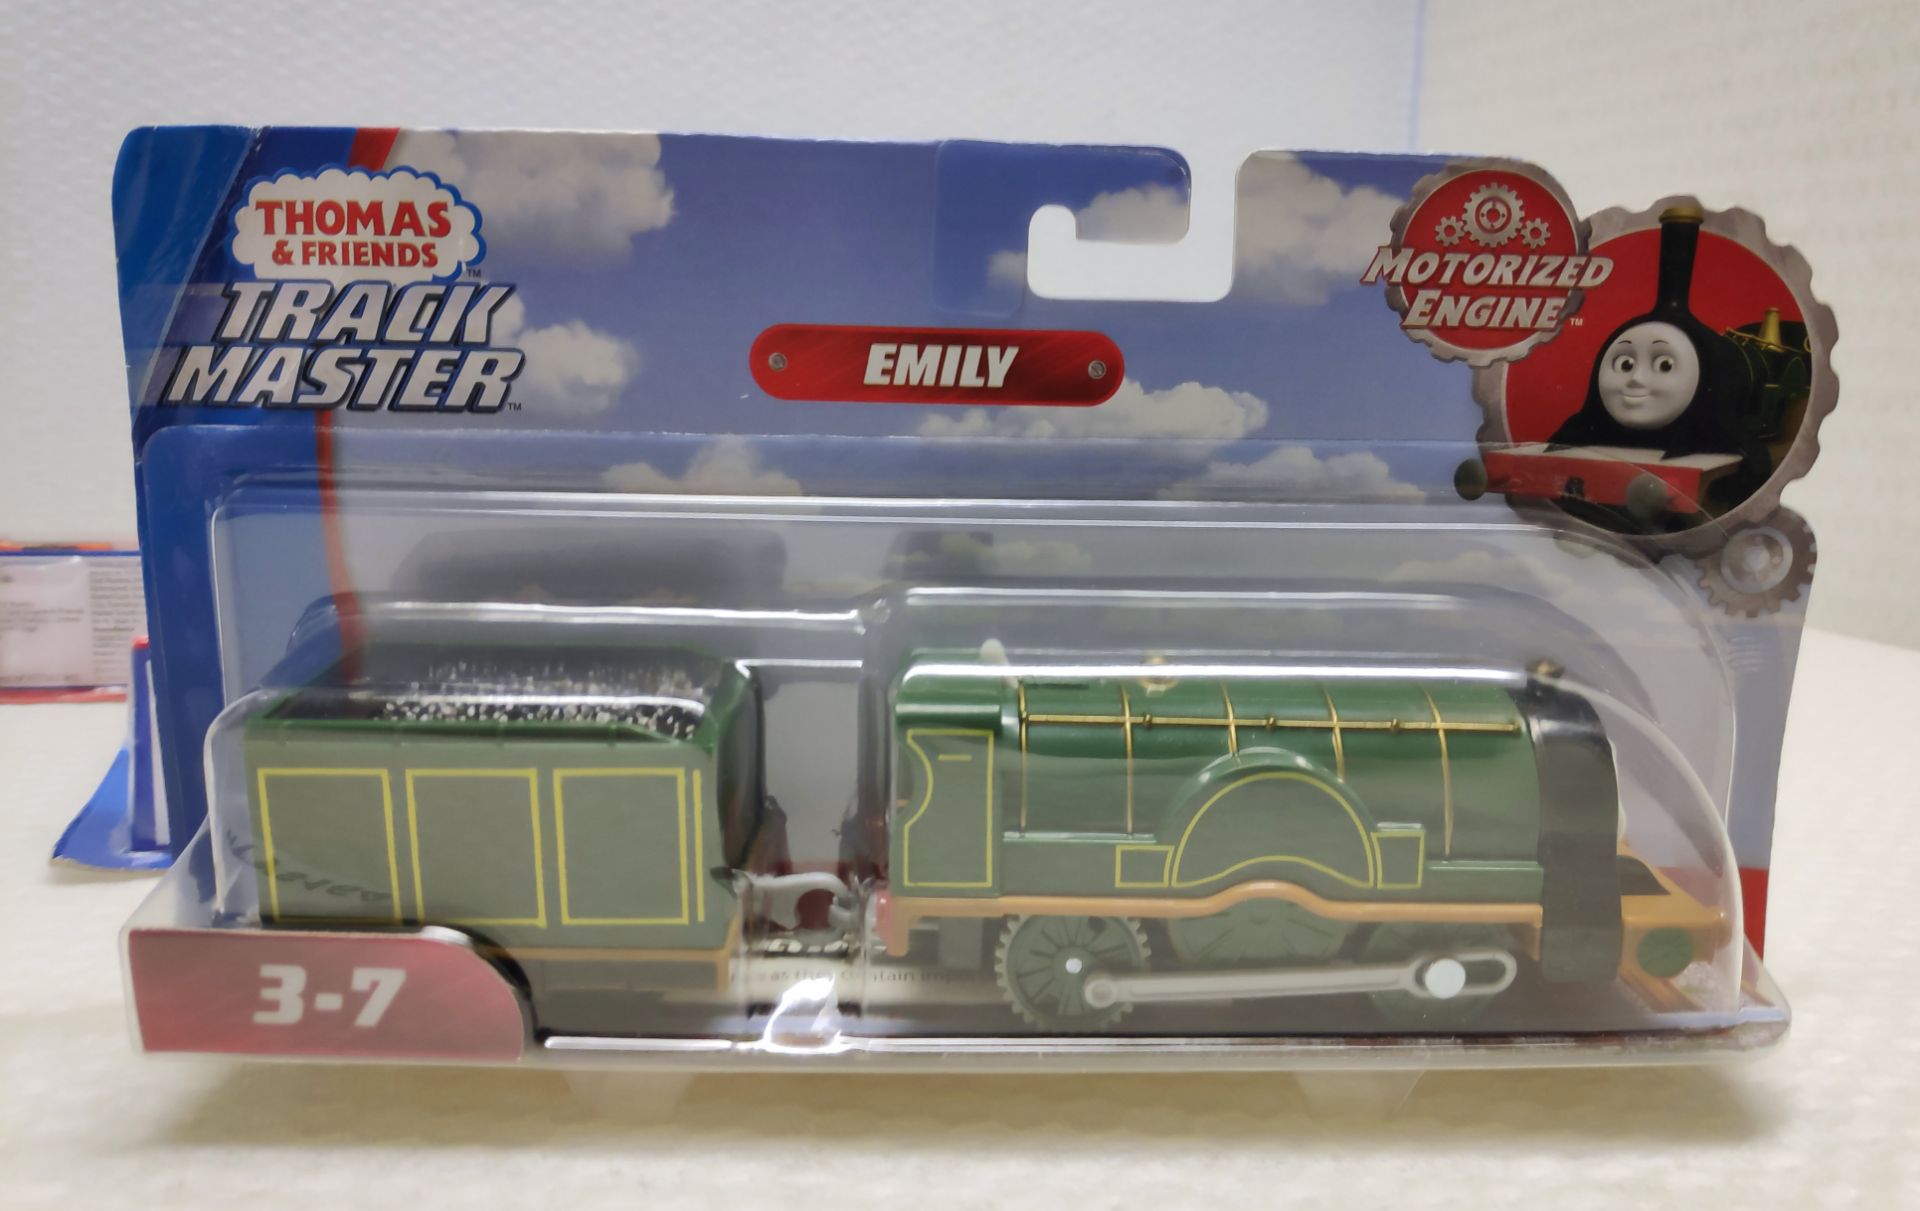 5 x Thomas & Friends Trackmaster Trains - Percy, Gordon, James, Emily and Rebecca - New/Boxed - HTYS - Image 6 of 8